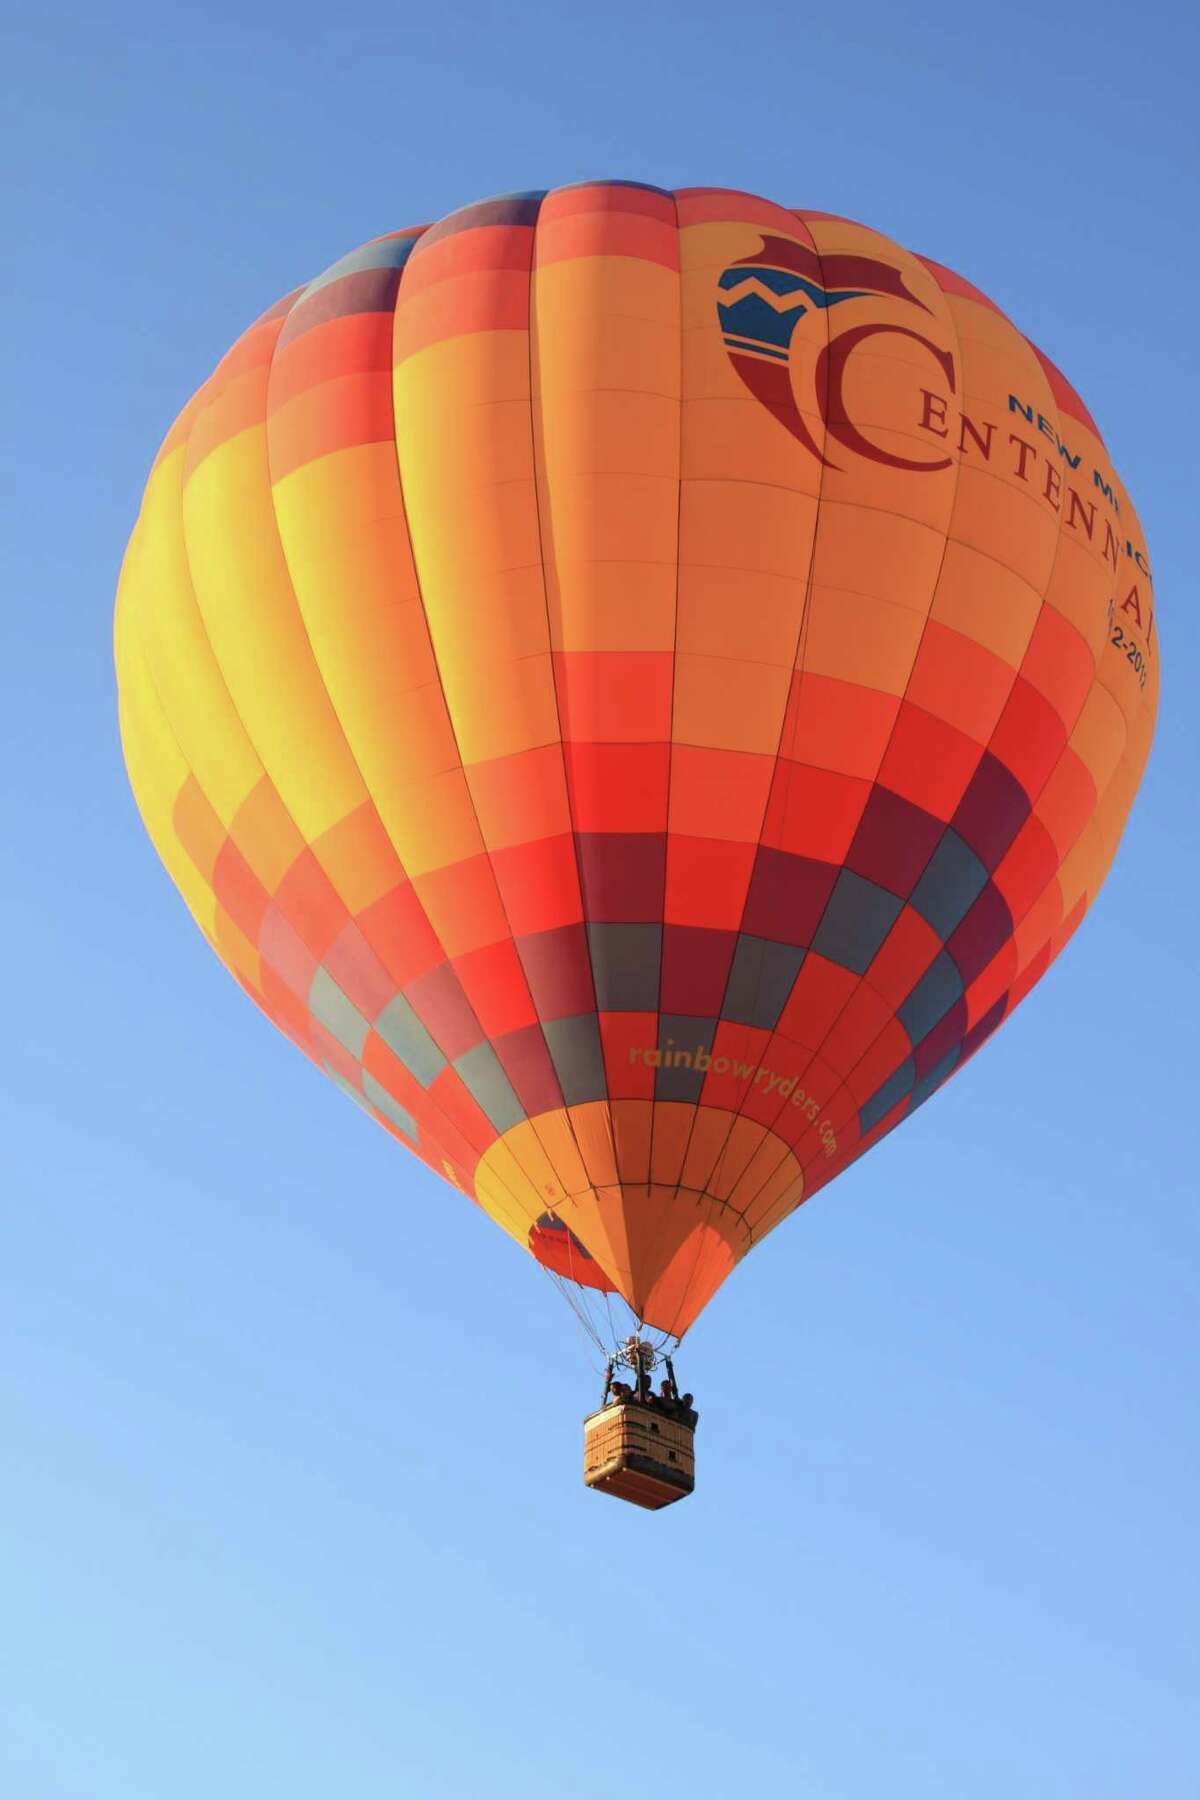 Almost every dawn of the year, hot air balloons rise like jewels in the sky over Albuquerque, New Mexico.